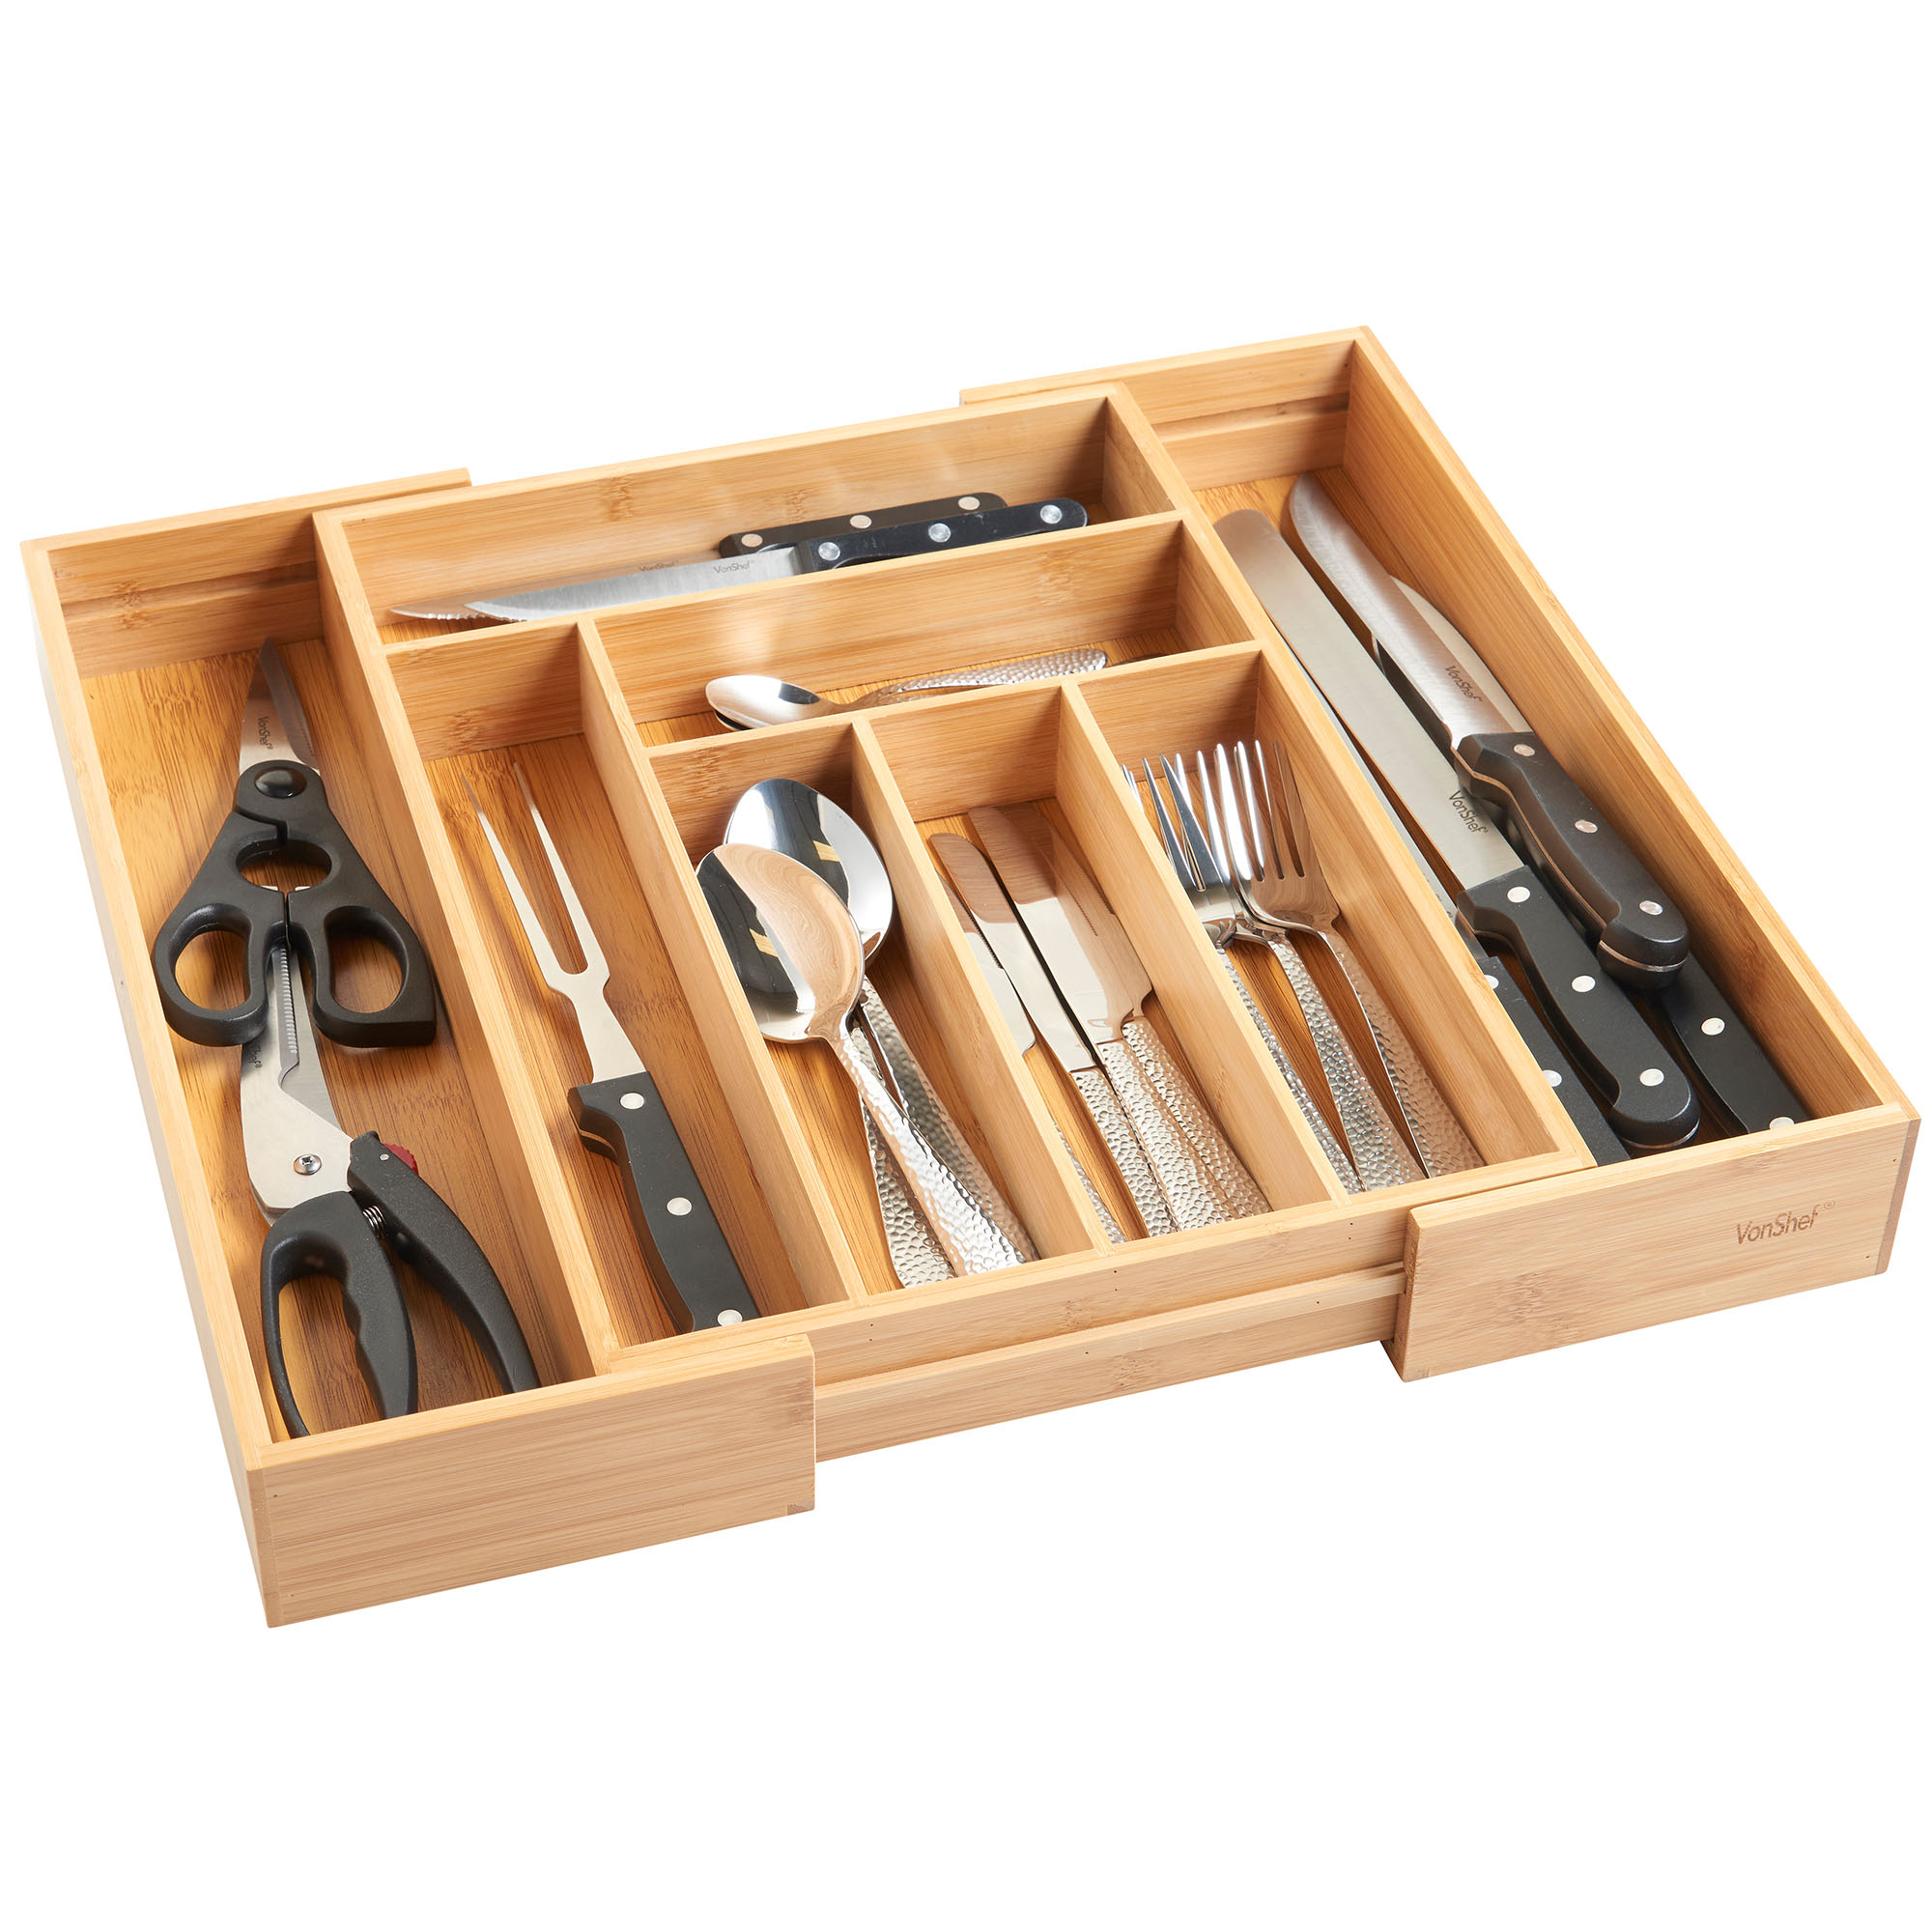 VonShef Cutlery Tray Organiser Drawer Storage Wooden Bamboo Expandable